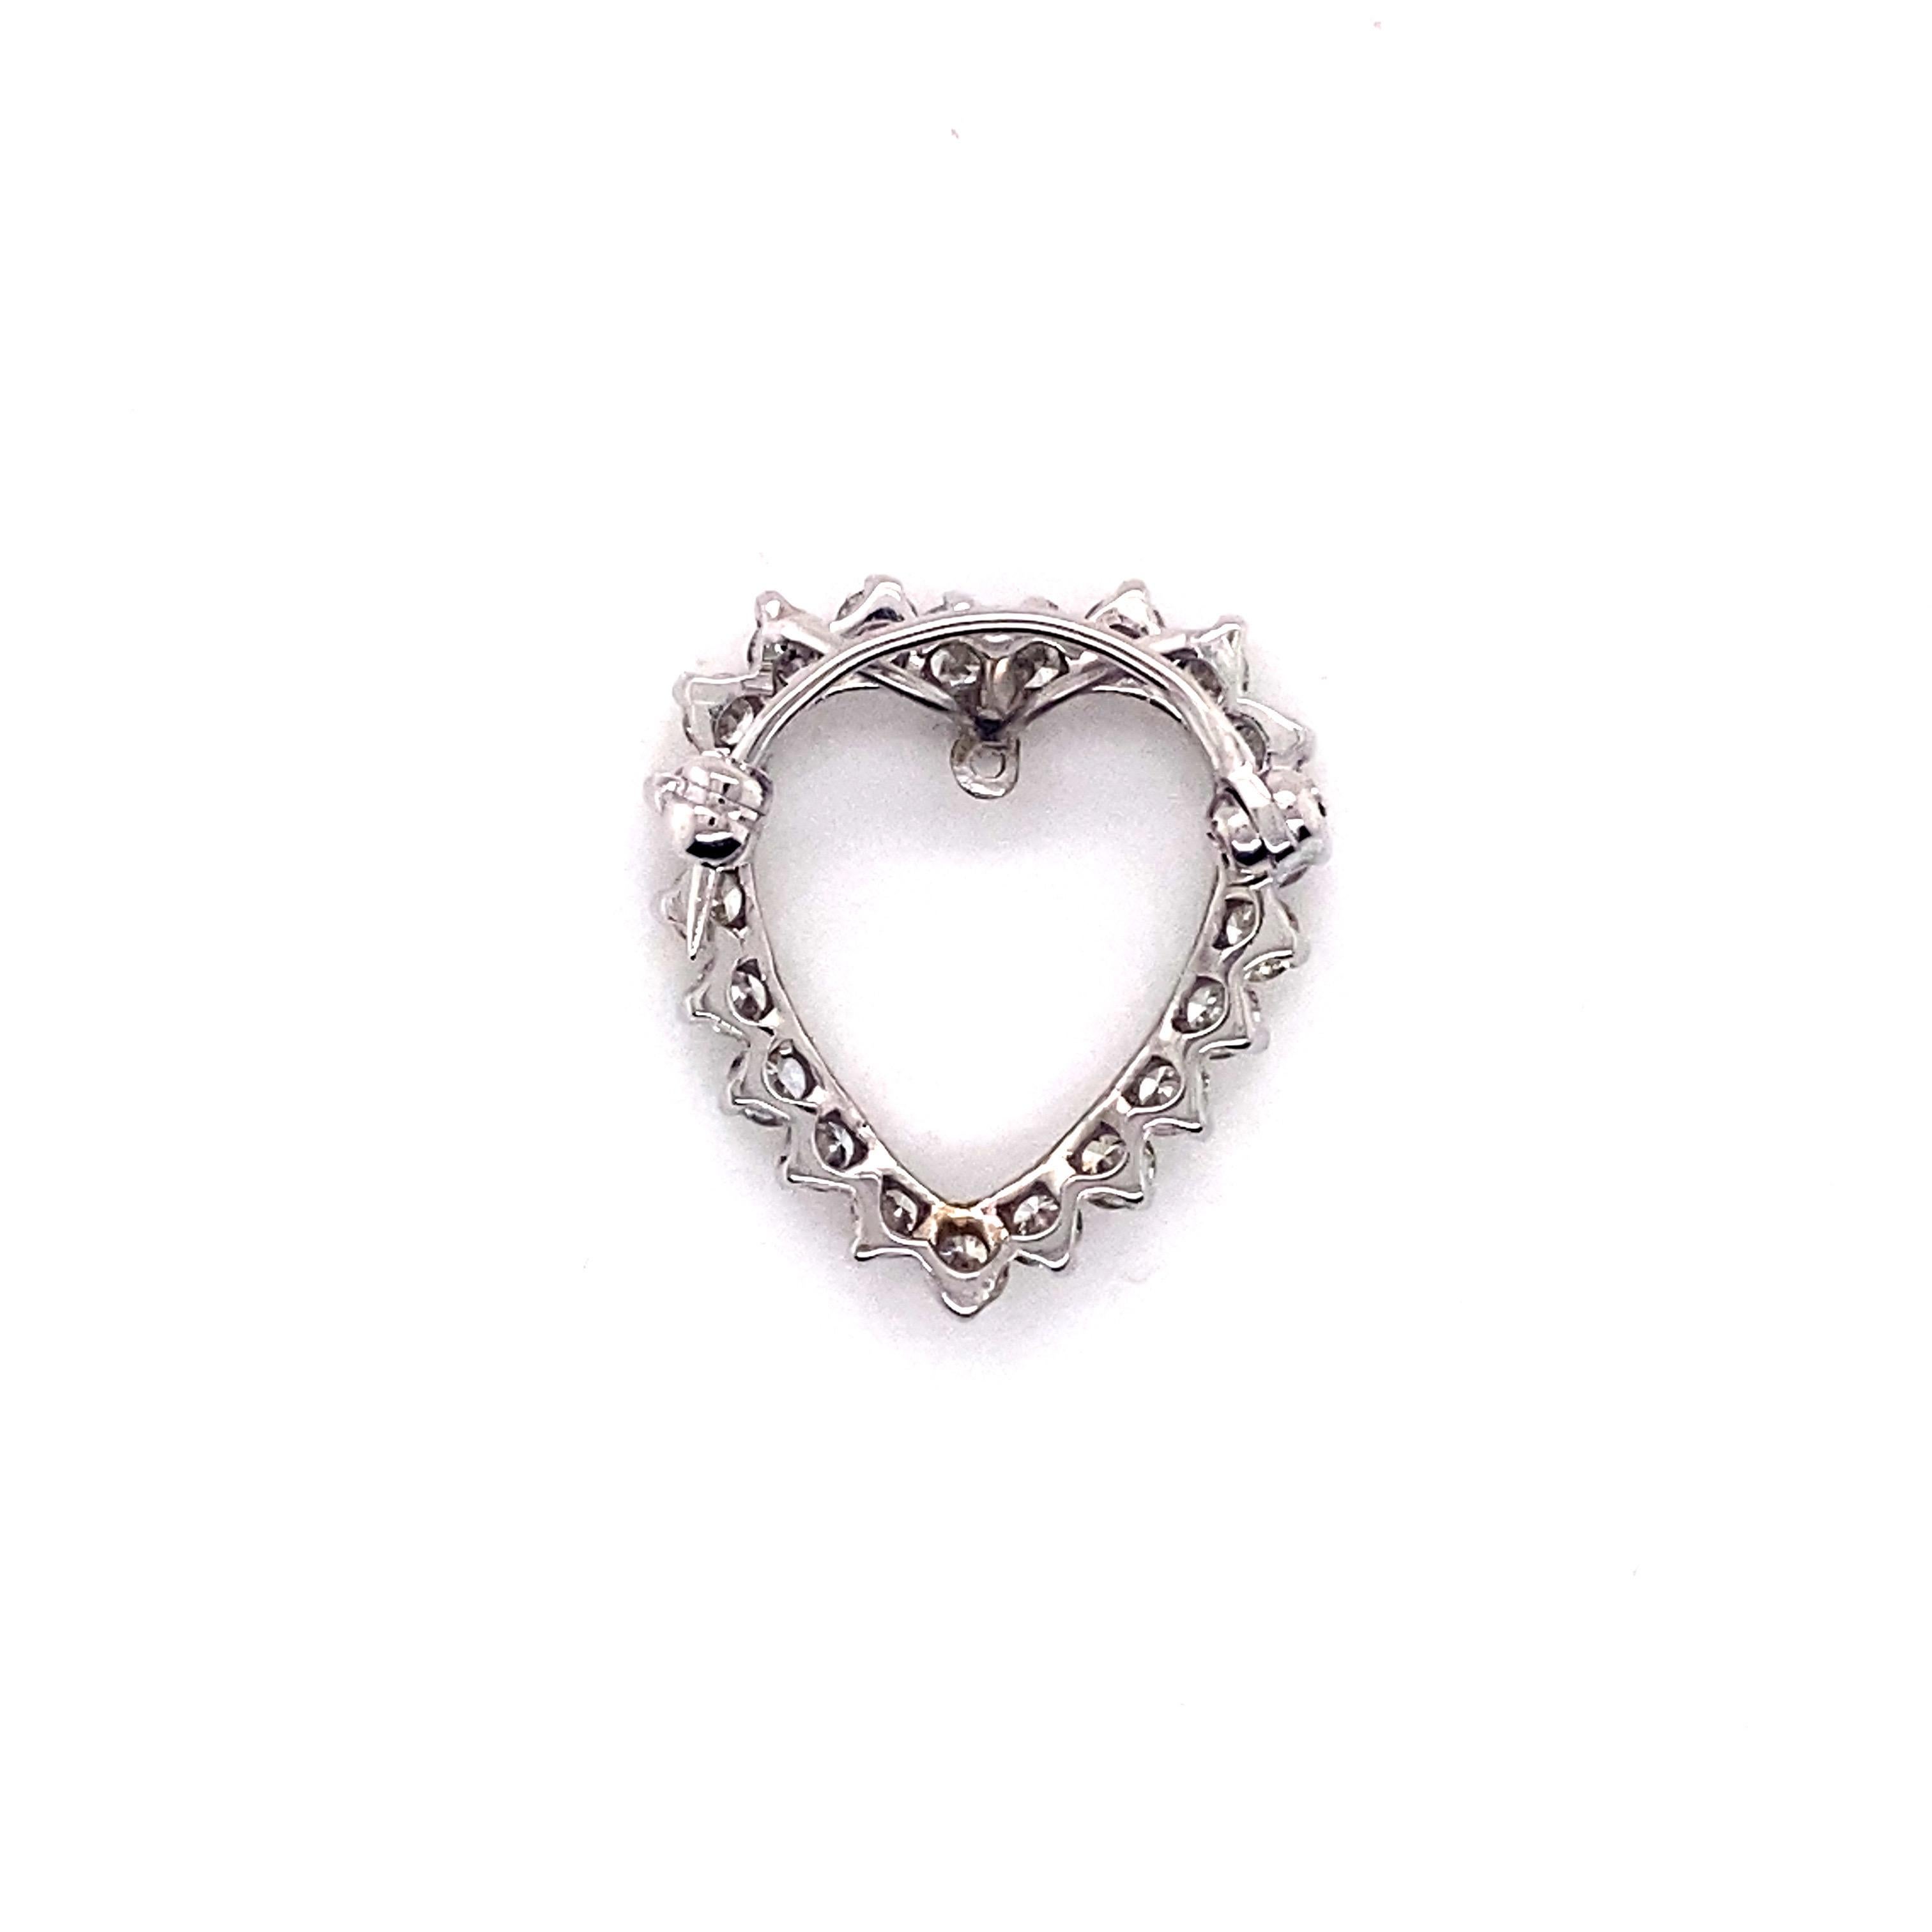 Vintage 1960’s 14K White Gold Diamond Heart Pin and Pendant. The heart contains 21 round brilliant diamonds prong set and weigh approximately 1.50ct. The diamond quality is G - H color and VS - SI clarity. The heart has a hidden double bail for a